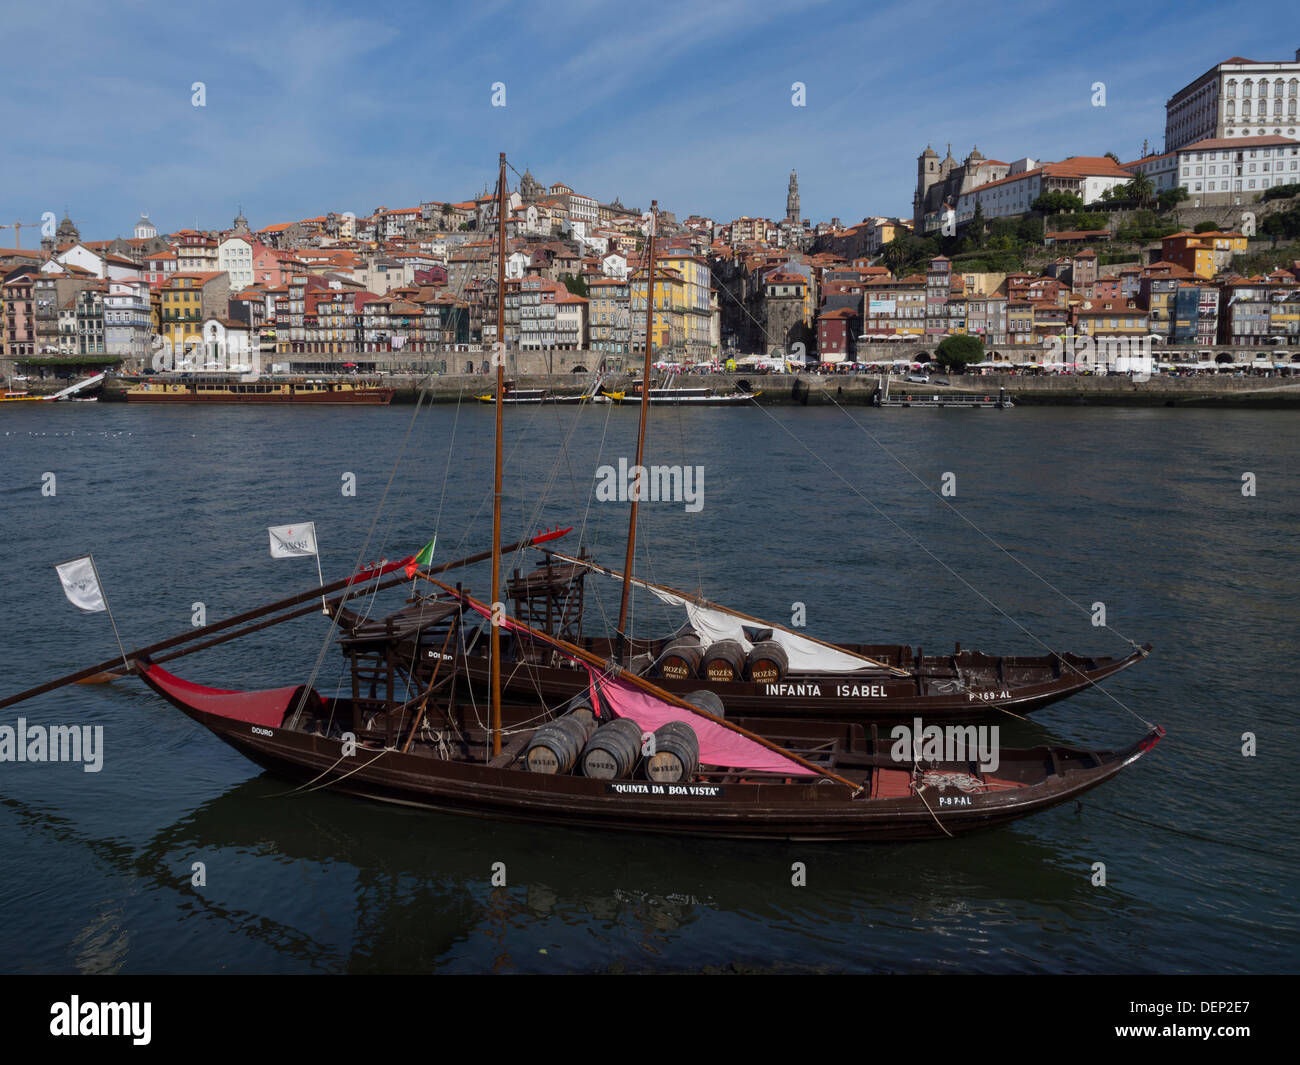 Rabelo boats traditionally used to transport Port wine on the river Douro, Porto, Portugal, Europe Stock Photo